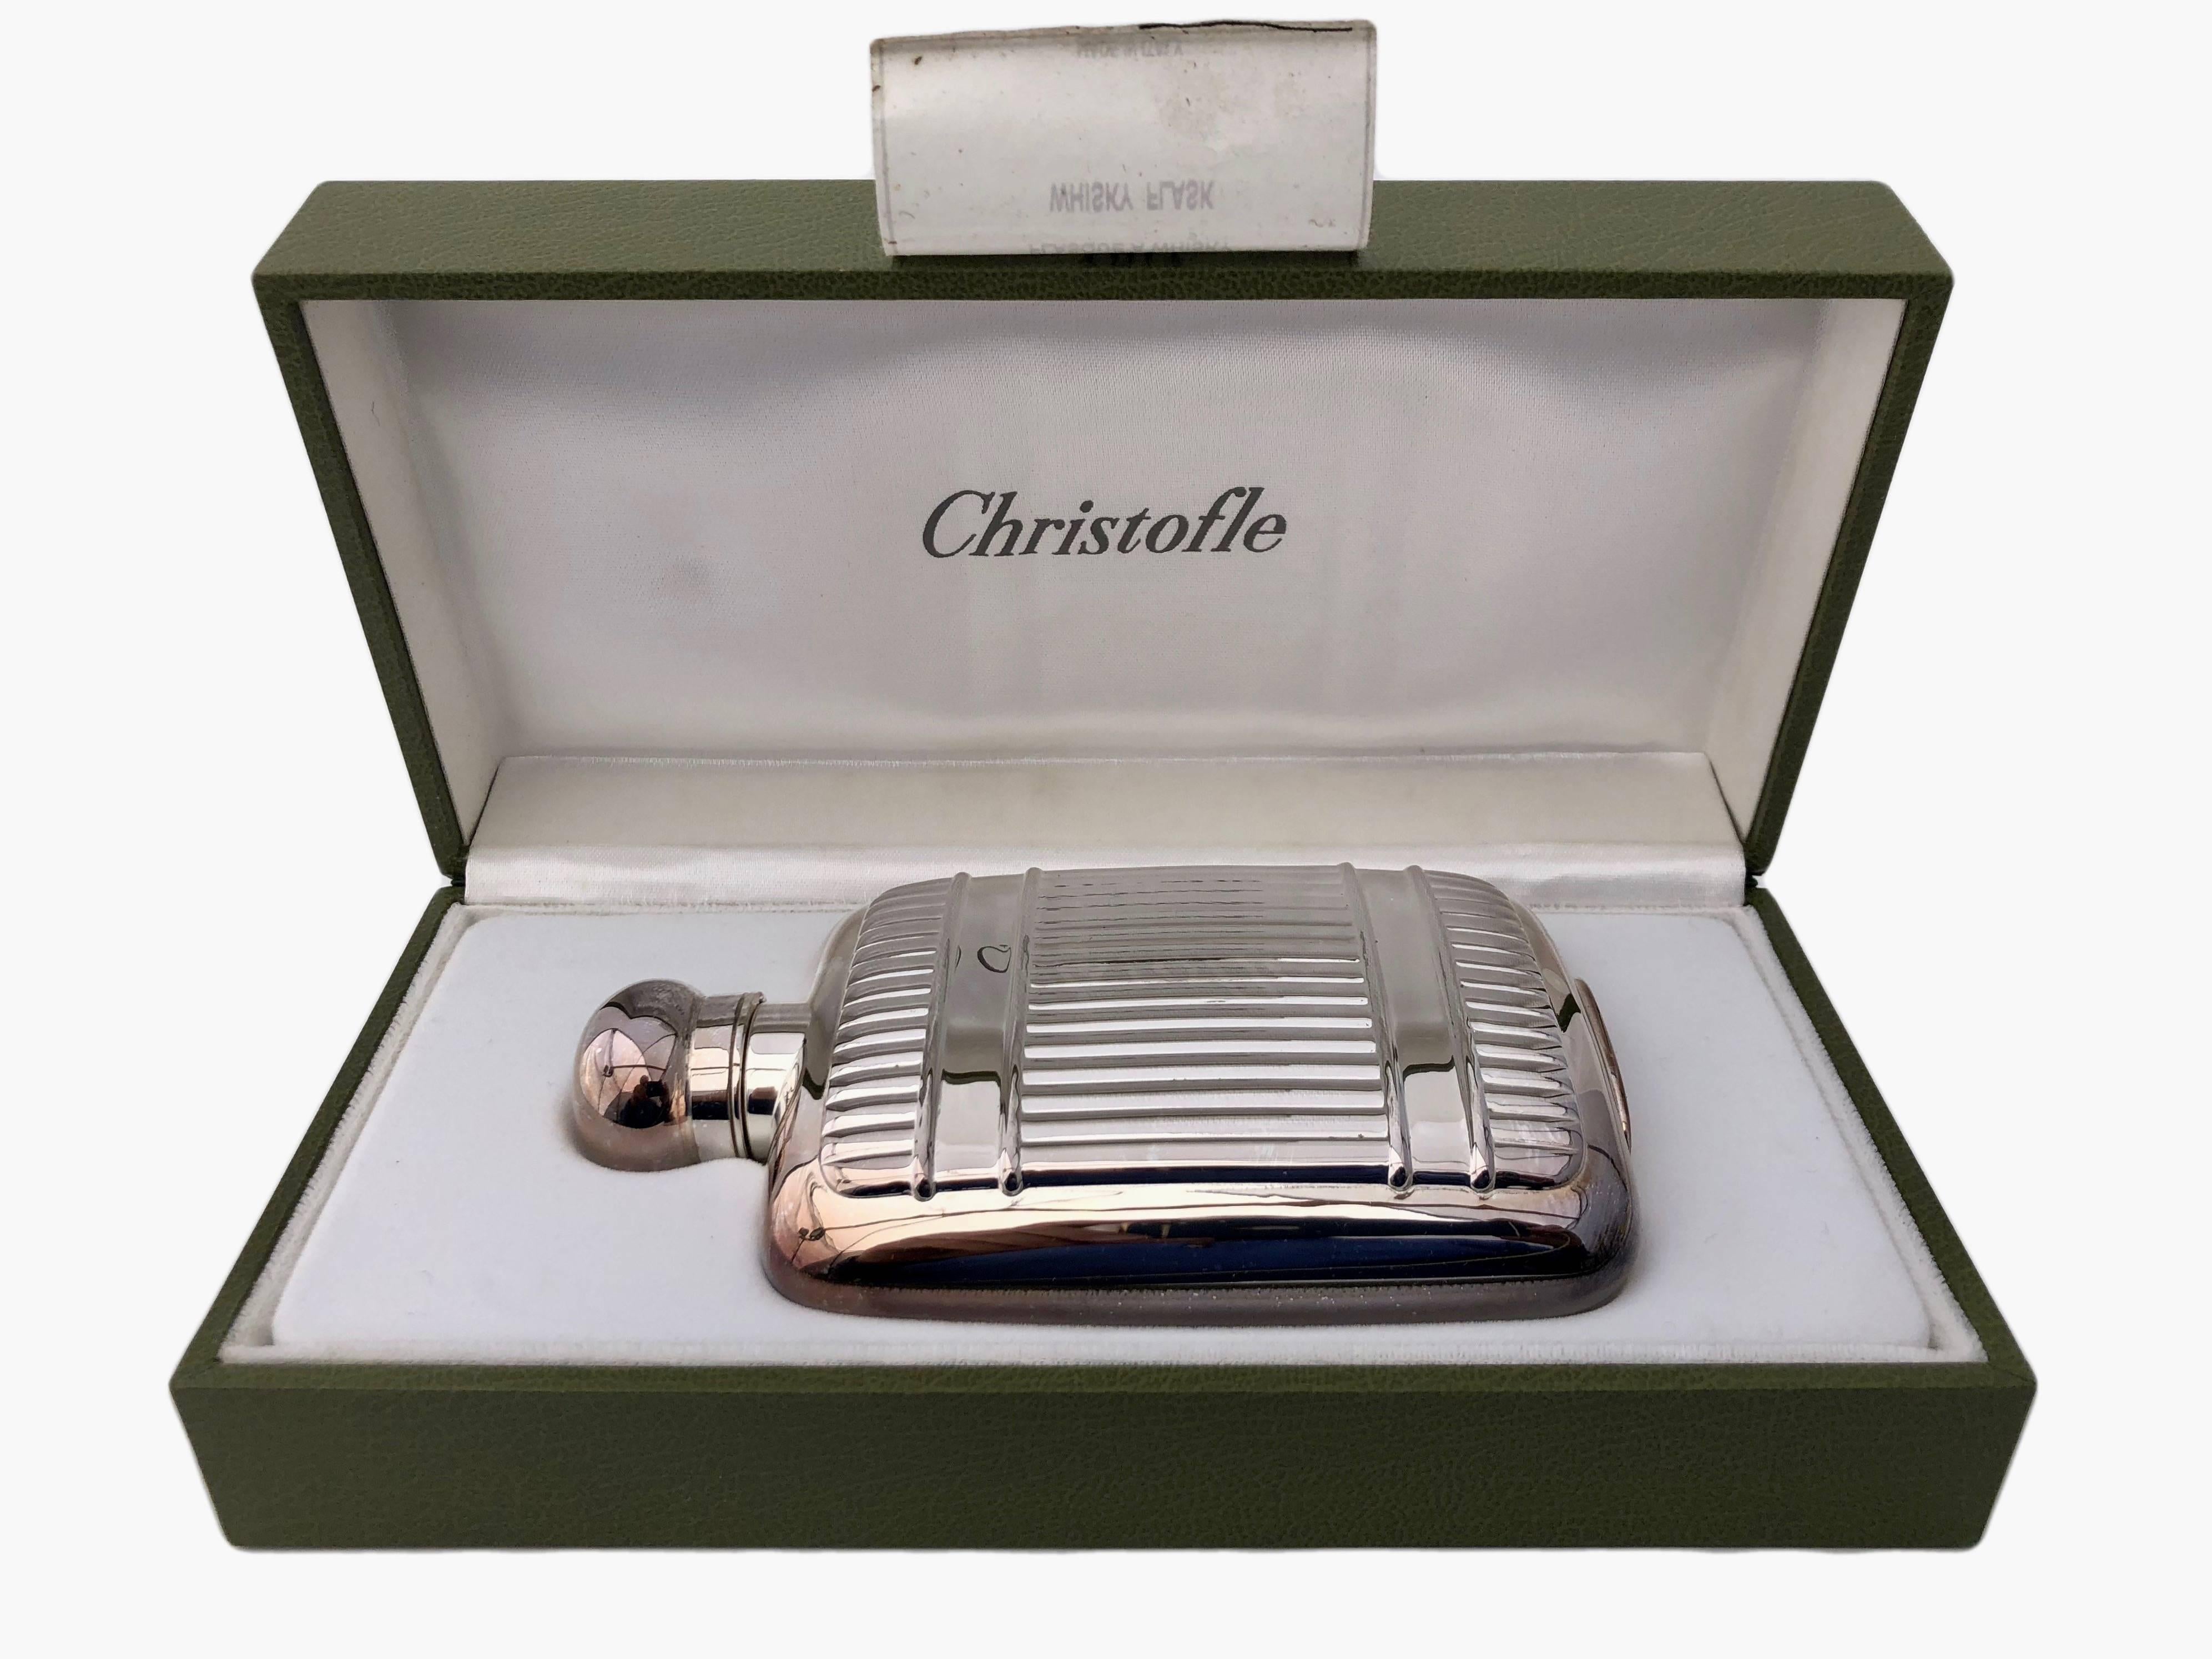 Christofle Plated Silver Whisky Flask, Model Aria, Late 1900s In Excellent Condition For Sale In Petaluma, CA